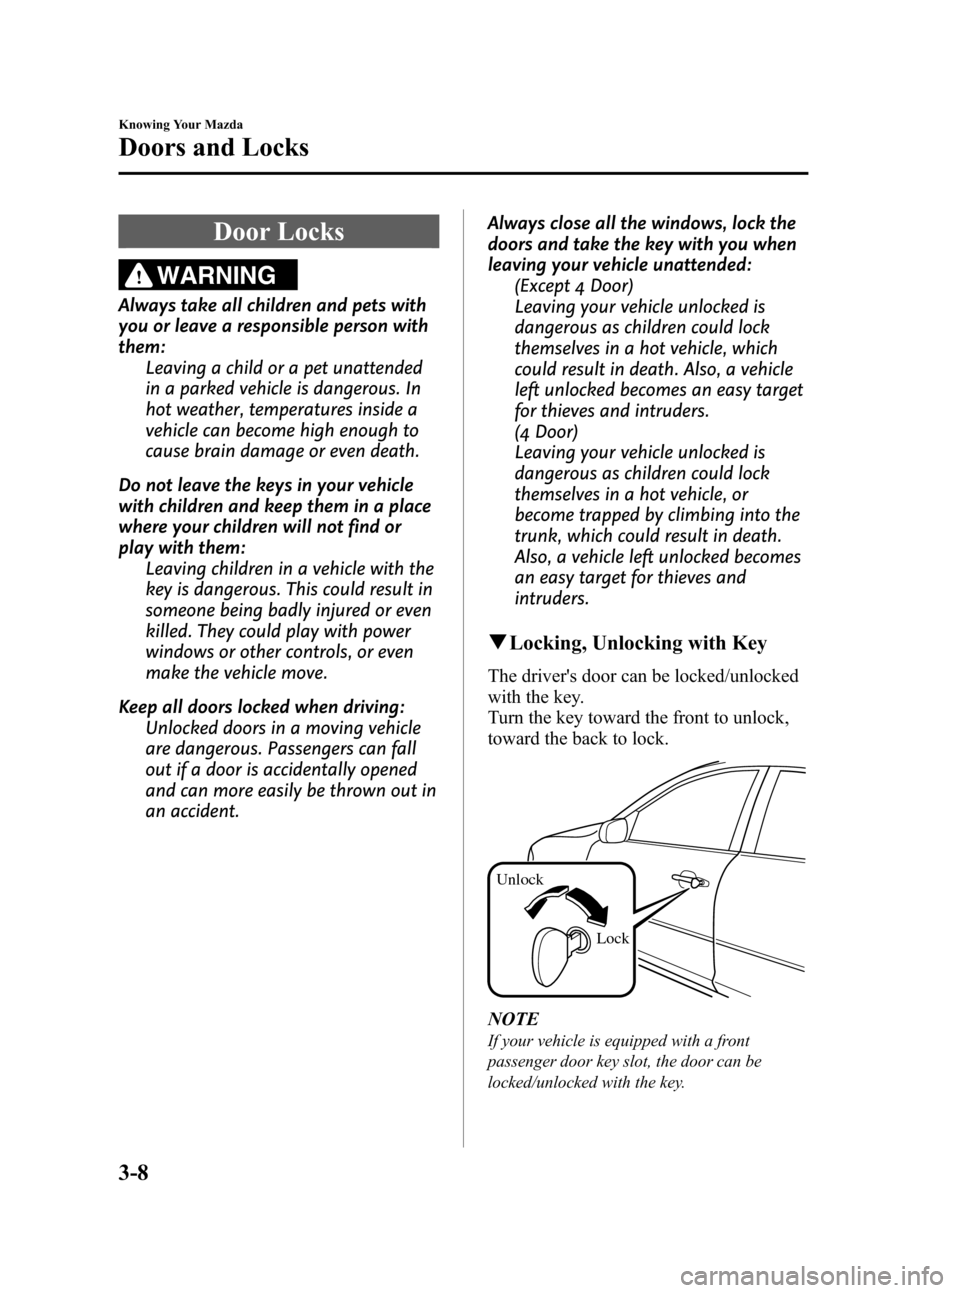 MAZDA MODEL 3 HATCHBACK 2008  Owners Manual (in English) Black plate (80,1)
Door Locks
WARNING
Always take all children and pets with
you or leave a responsible person with
them:
Leaving a child or a pet unattended
in a parked vehicle is dangerous. In
hot w